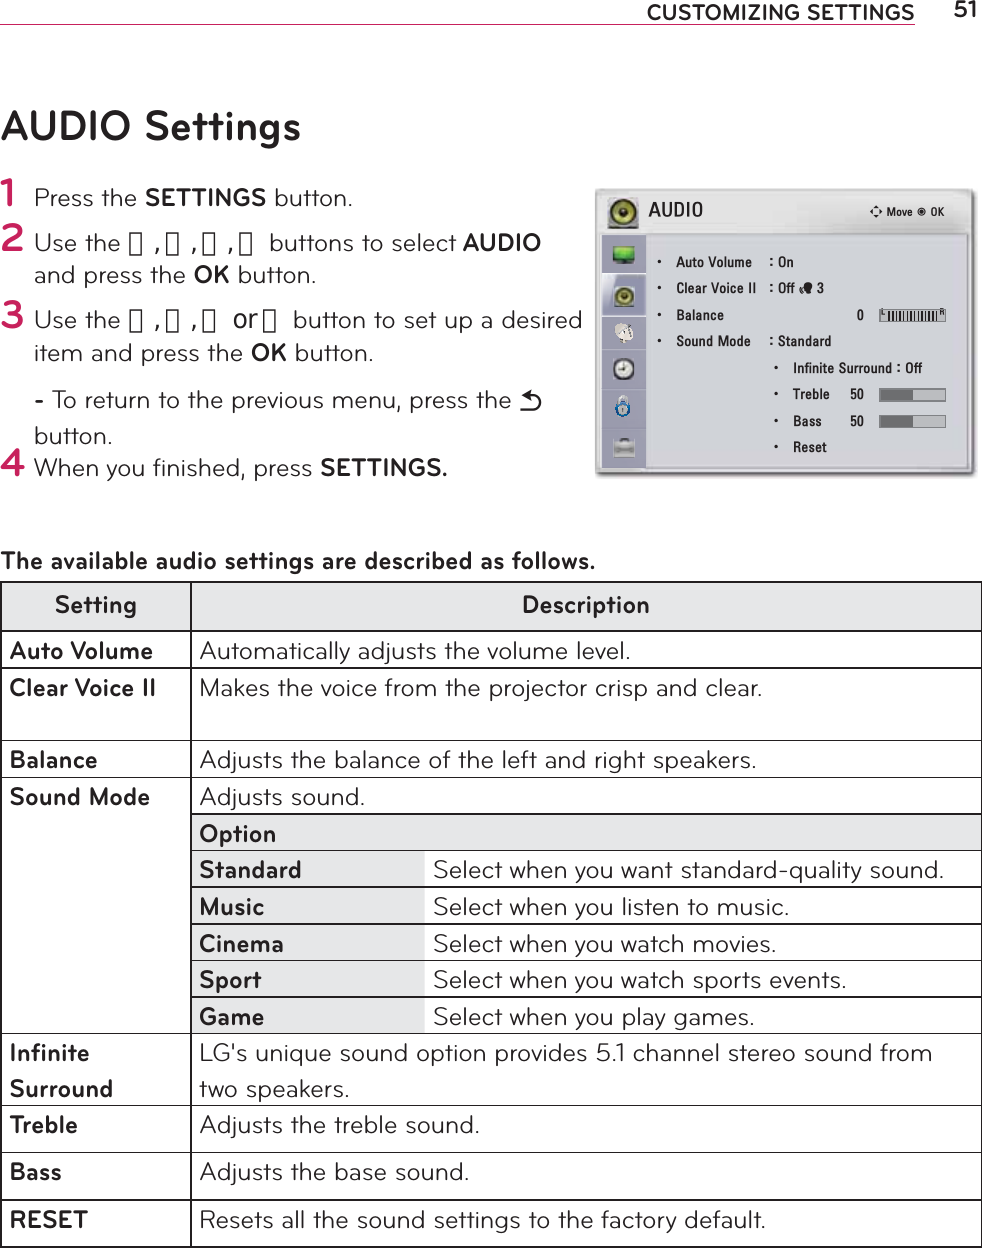 51CUSTOMIZING SETTINGSAUDIO Settings1 Press the SETTINGS button.2 Use the 󱛨, 󱛩, 󱛦, 󱛧 buttons to select AUDIO and press the OK button.3 Use the 󱛨, 󱛩, 󱛦 or 󱛧 button to set up a desired item and press the OK button.- To return to the previous menu, press the ᰳ button.4 When you ﬁnished, press SETTINGS.The available audio settings are described as follows.Setting DescriptionAuto Volume Automatically adjusts the volume level.Clear Voice II Makes the voice from the projector crisp and clear.Balance Adjusts the balance of the left and right speakers.Sound Mode Adjusts sound.OptionStandard Select when you want standard-quality sound.Music Select when you listen to music.Cinema Select when you watch movies.Sport Select when you watch sports events.Game Select when you play games.Inﬁnite  SurroundLG&apos;s unique sound option provides 5.1 channel stereo sound from two speakers.Treble Adjusts the treble sound.Bass Adjusts the base sound.RESET Resets all the sound settings to the factory default.ᯒ0RYHᯙ2.$8&apos;,2ؒ $XWR9ROXPH 2Qؒ &amp;OHDU9RLFH,, 2IIᰕؒ %DODQFH   / 5ؒ 6RXQG0RGH 6WDQGDUGؒ ,QILQLWH6XUURXQG2IIؒ 7UHEOH ؒ %DVV ؒ 5HVHW